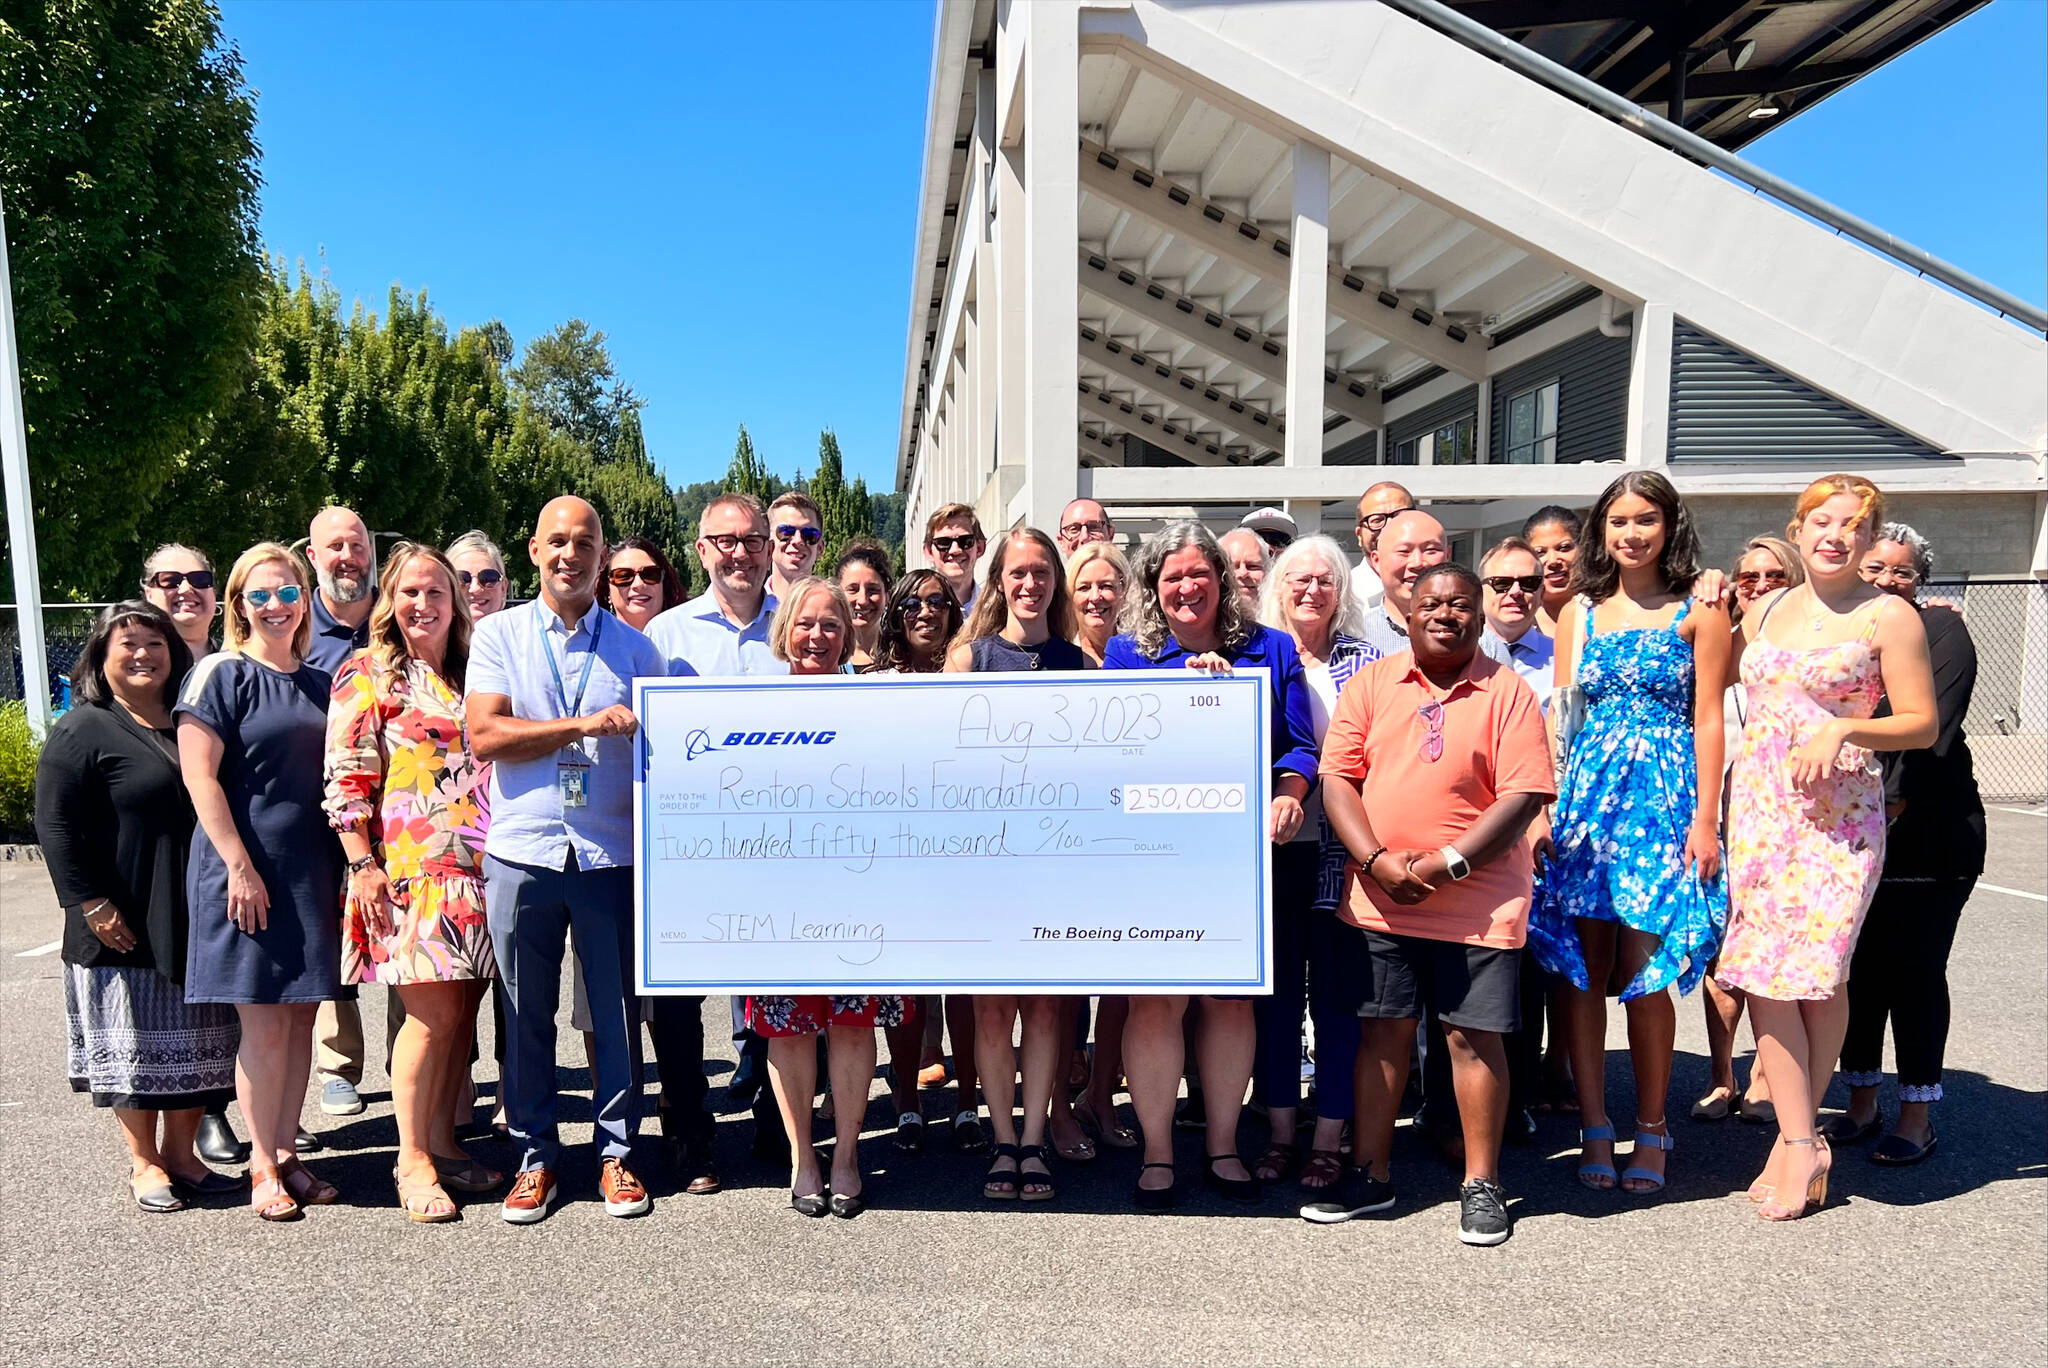 In total, Boeing has awarded $500,000 in grants to Renton School Foundation. Photo courtesy of Renton School Foundation.